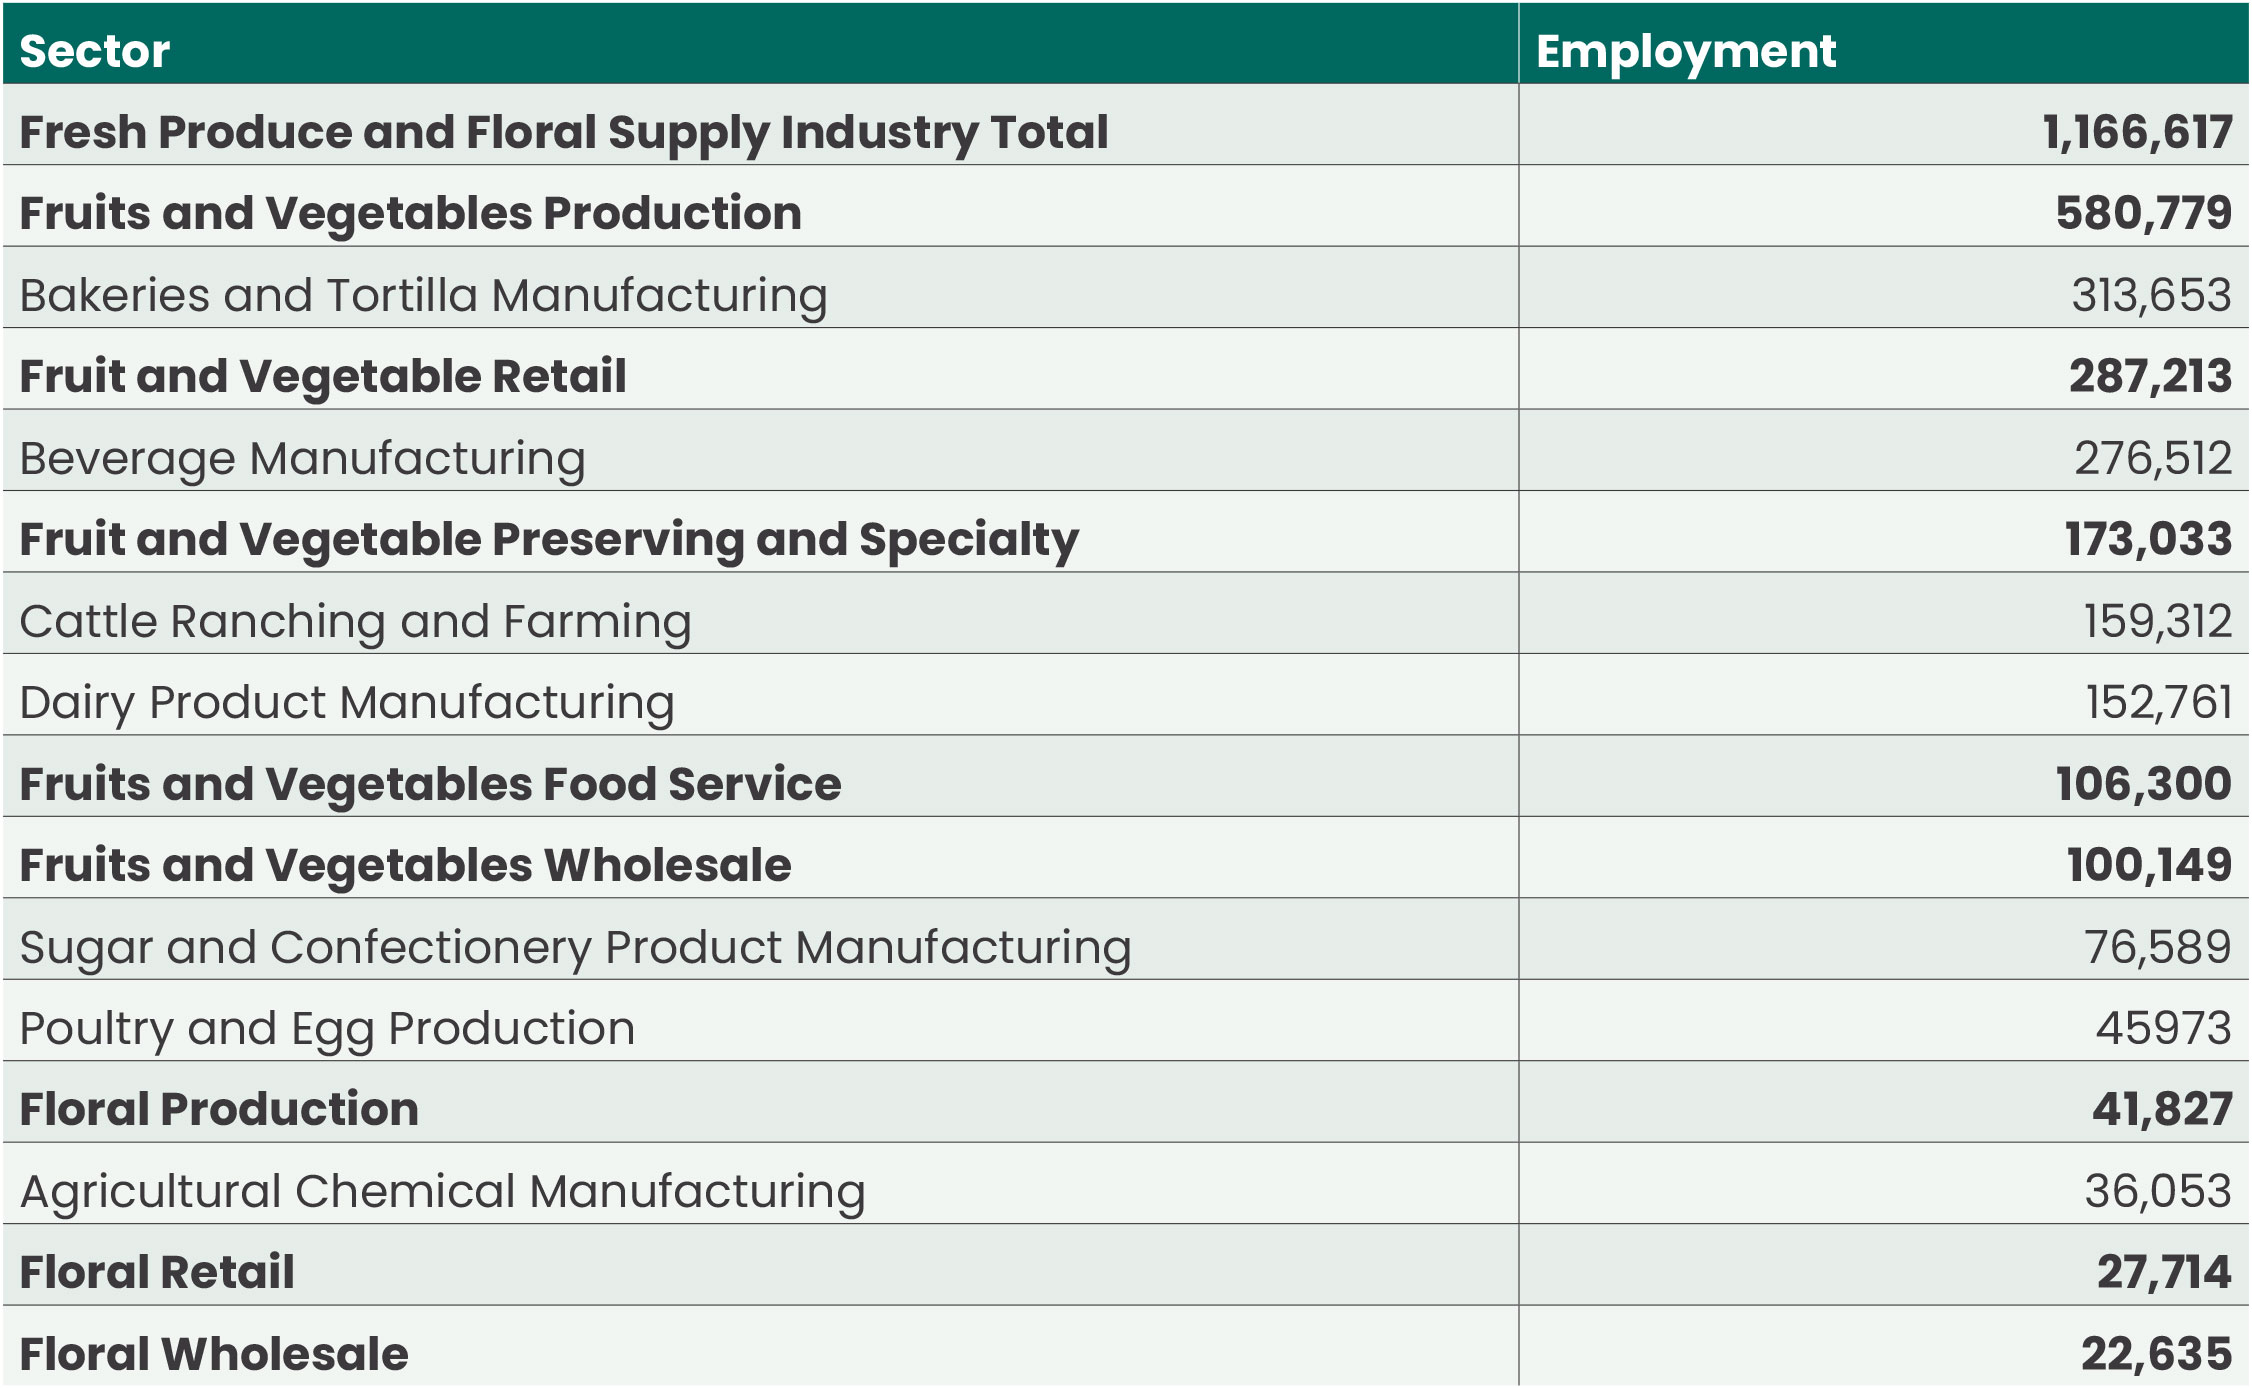 Chart showing the Comparative Magnitude of Direct Employment, 2019